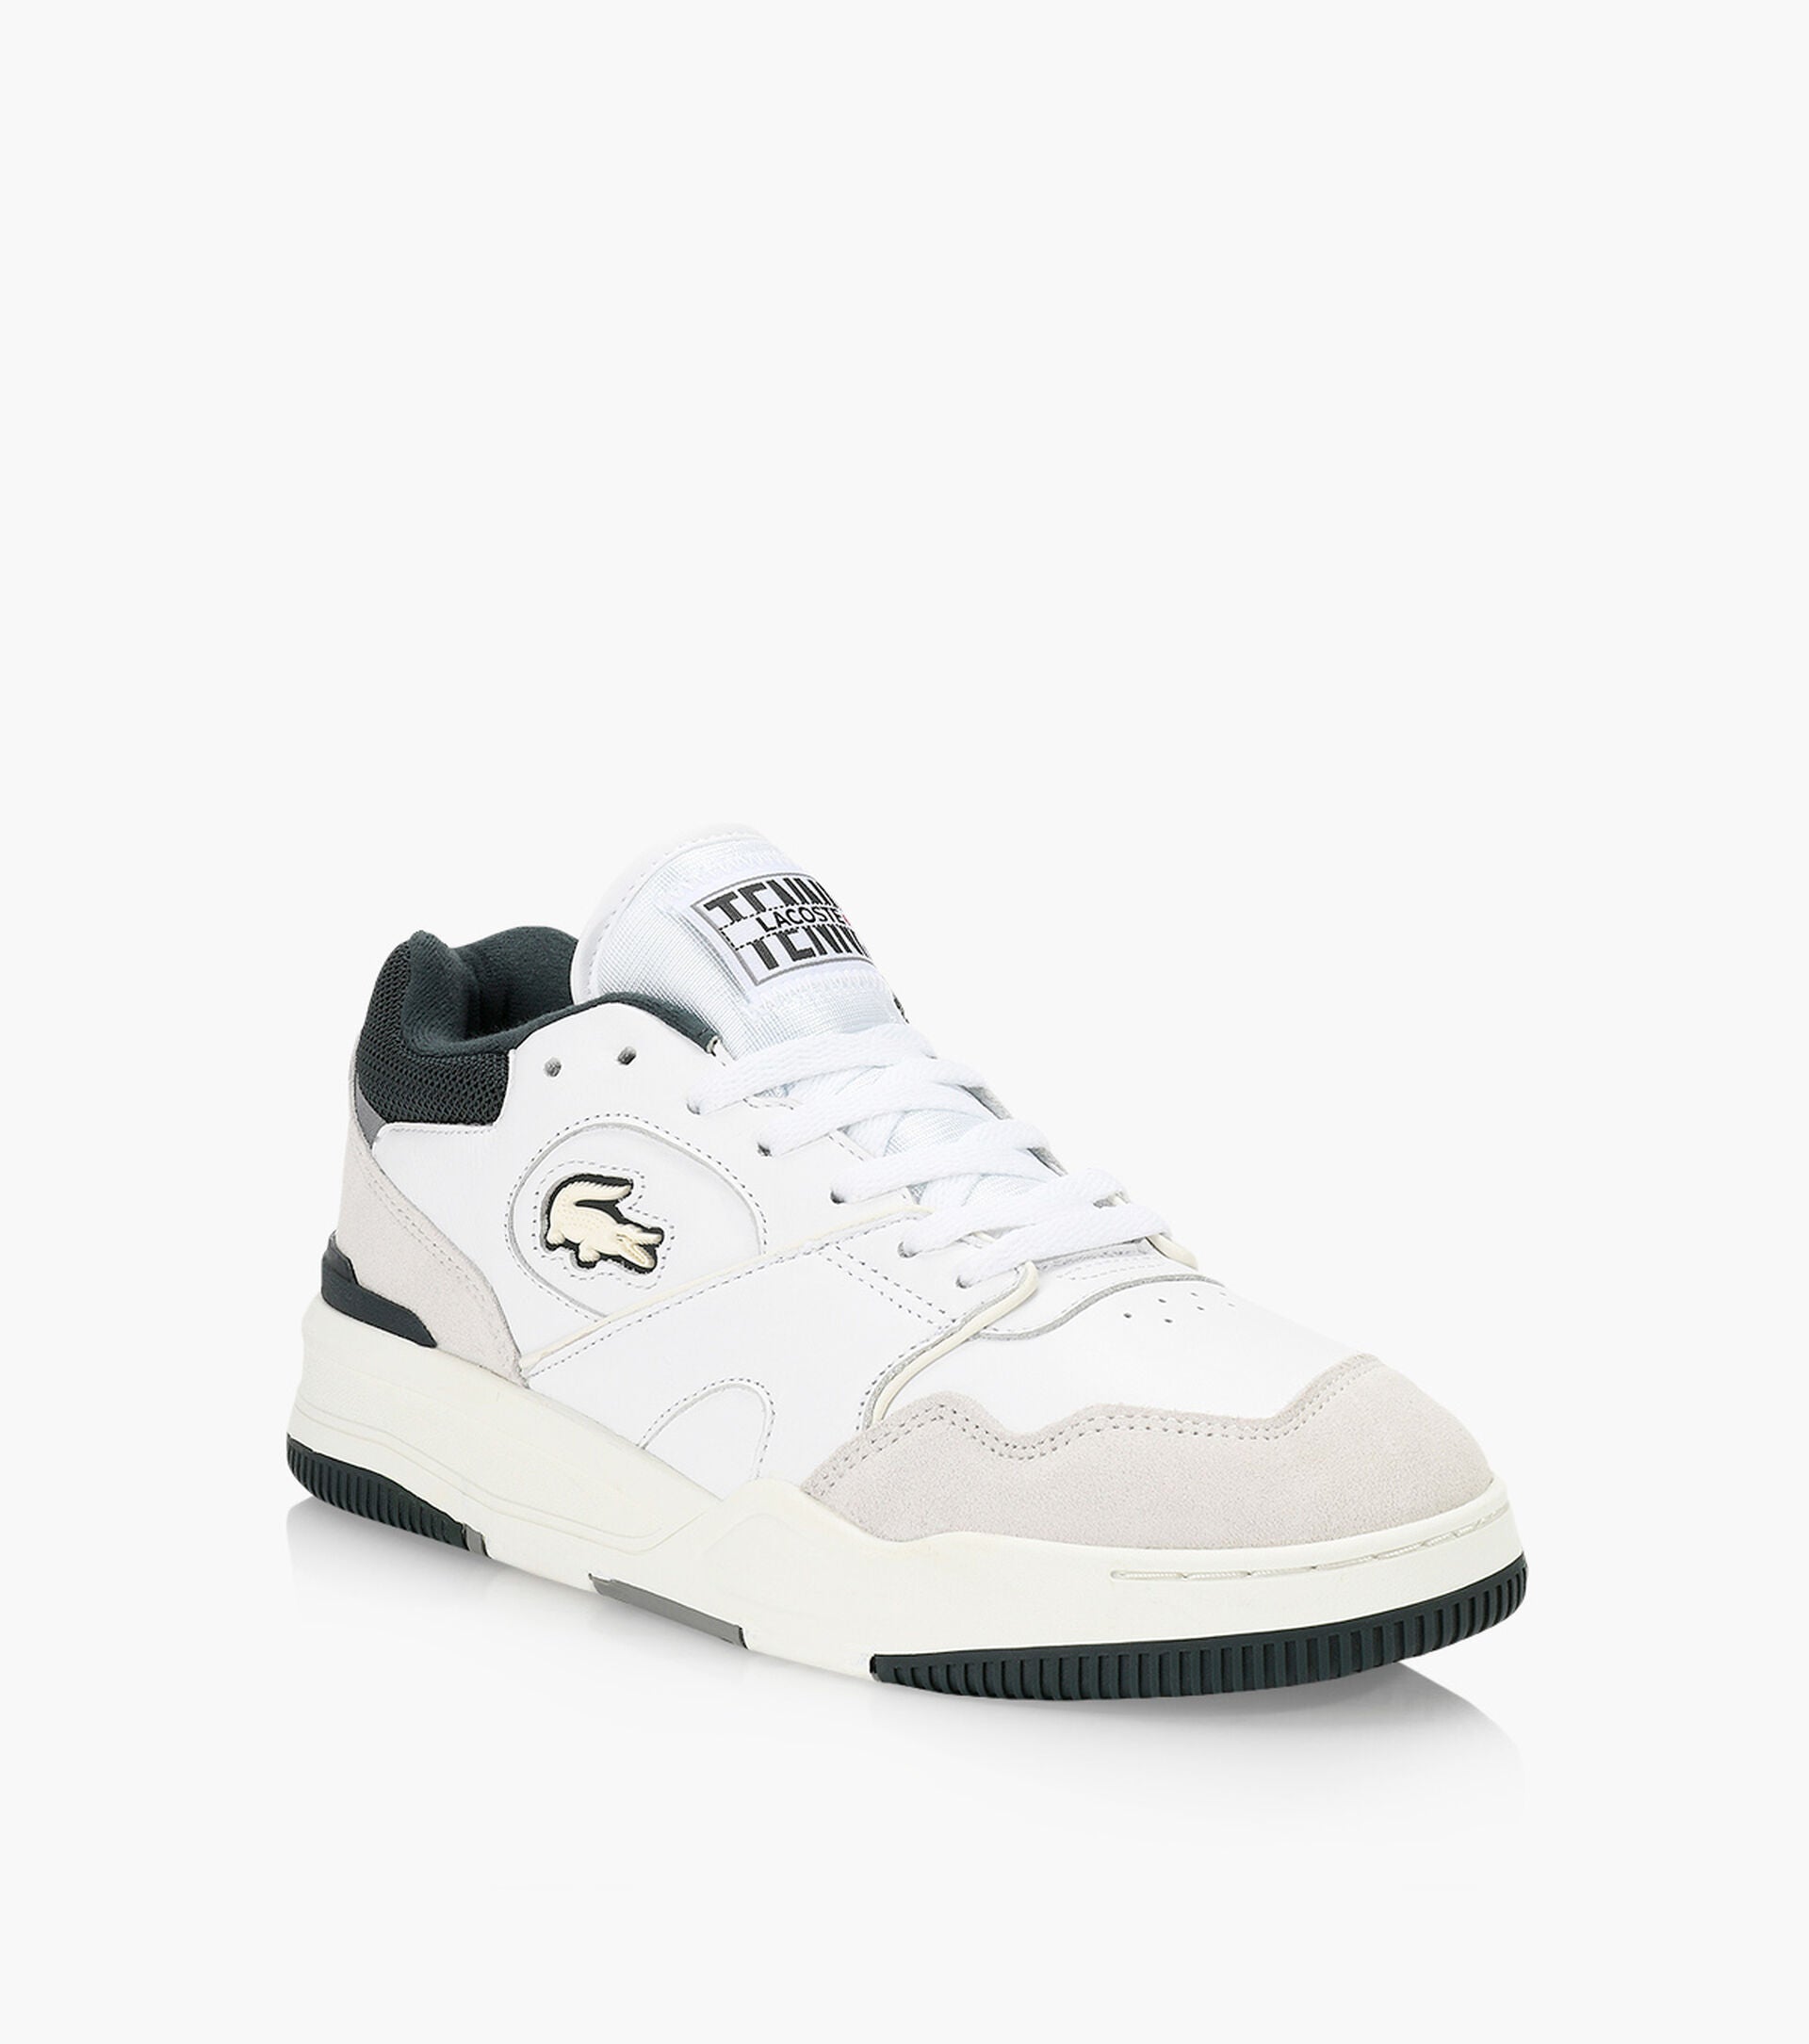 Lacoste Carnaby Pro Leather Sneakers - Farfetch